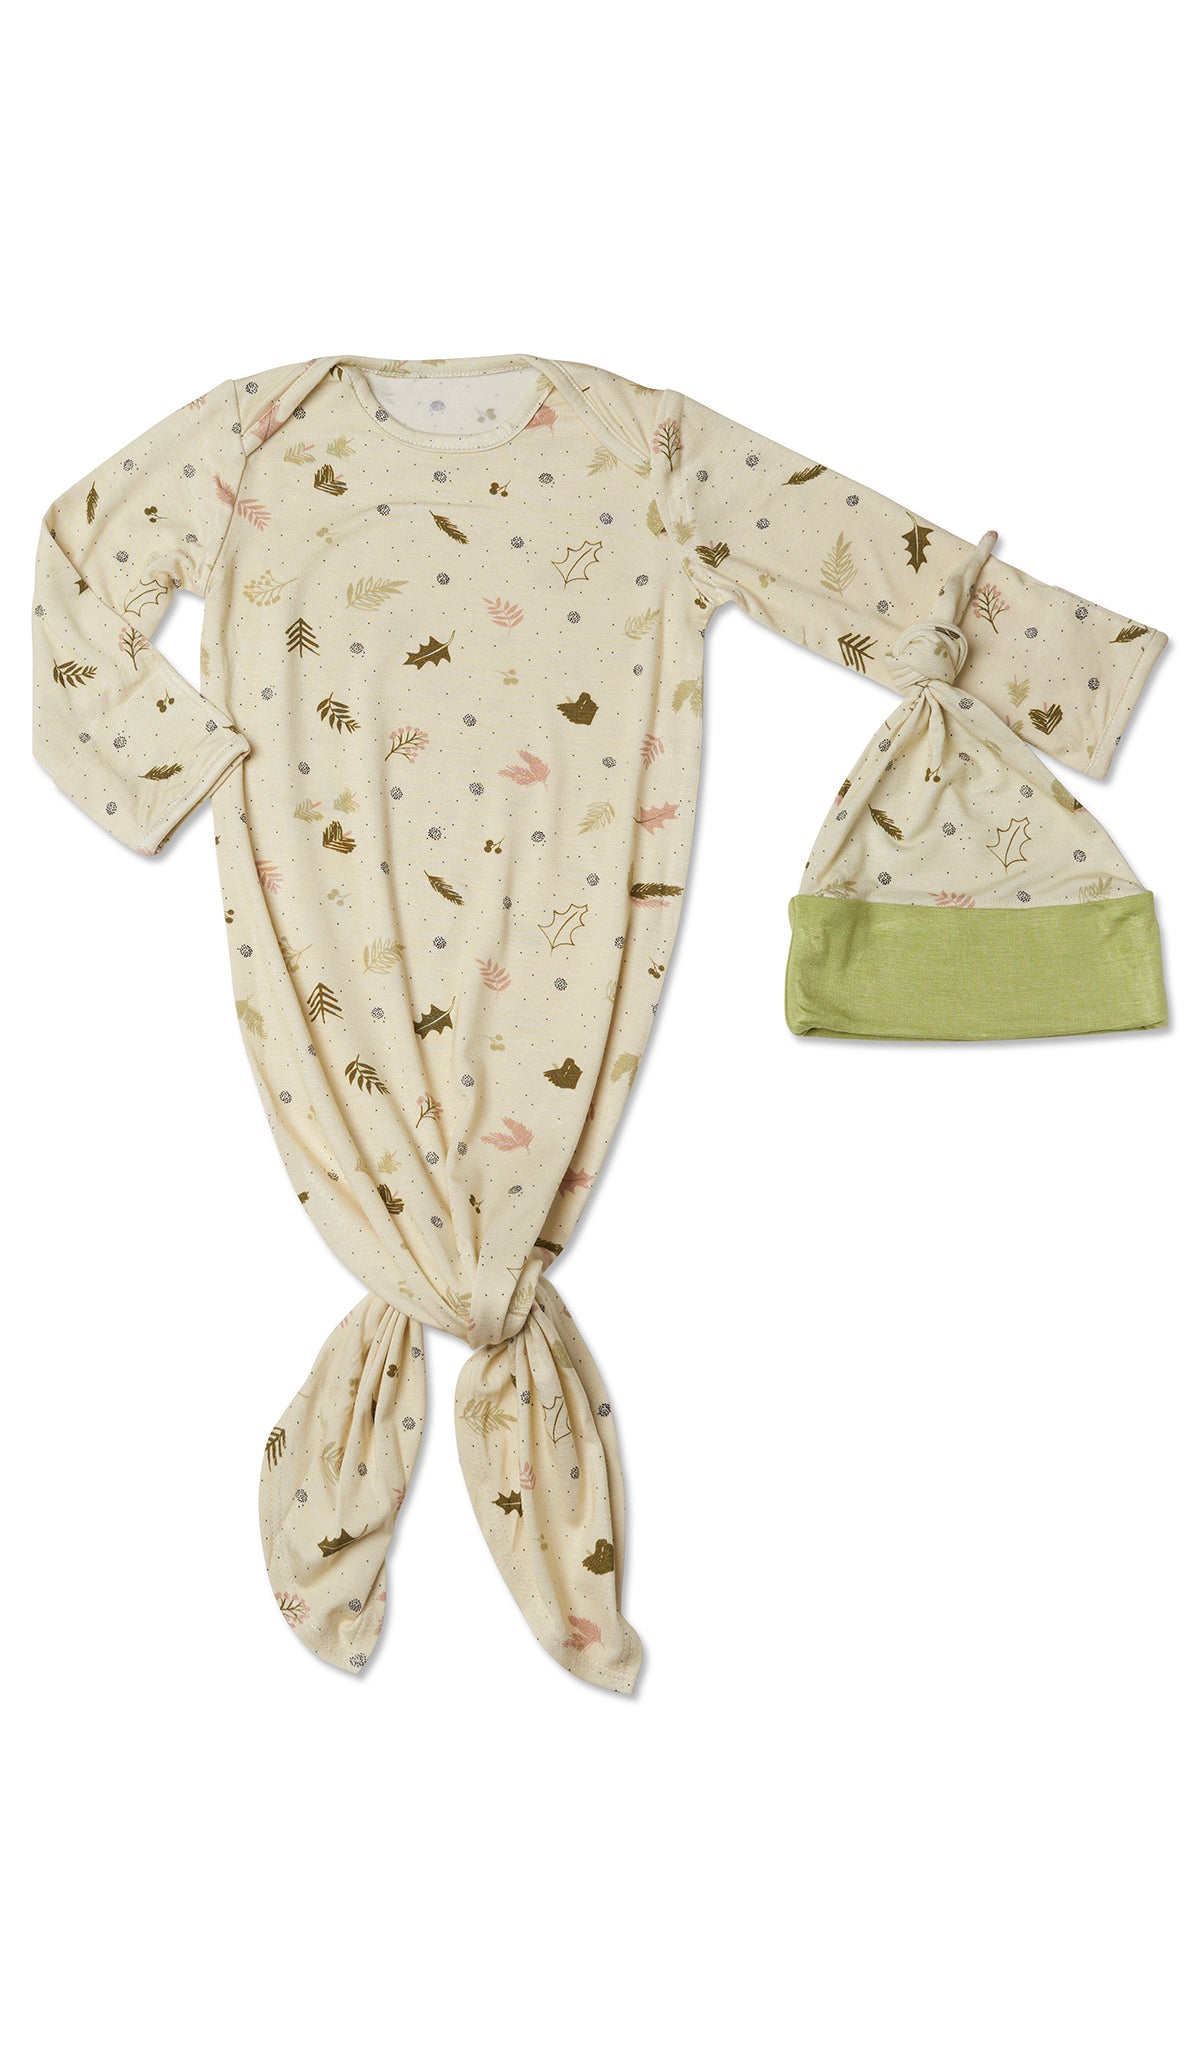 Nature Knotted Gown 2-Piece flat shot showing long sleeve baby gown with hem tied into a tie-knot bow and matching knotted hat.